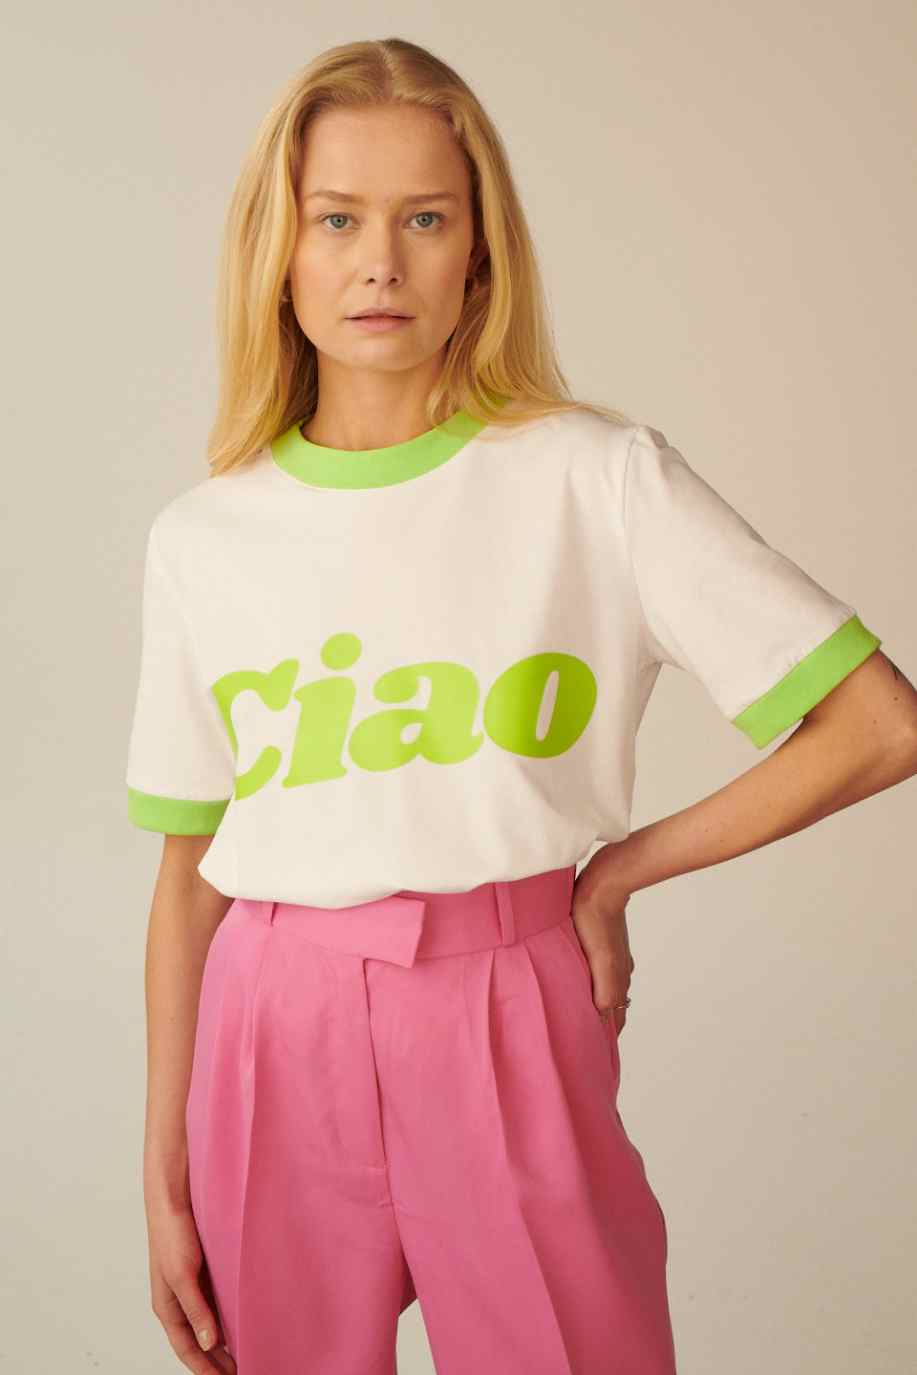 CIAO LIME T-SHIRT